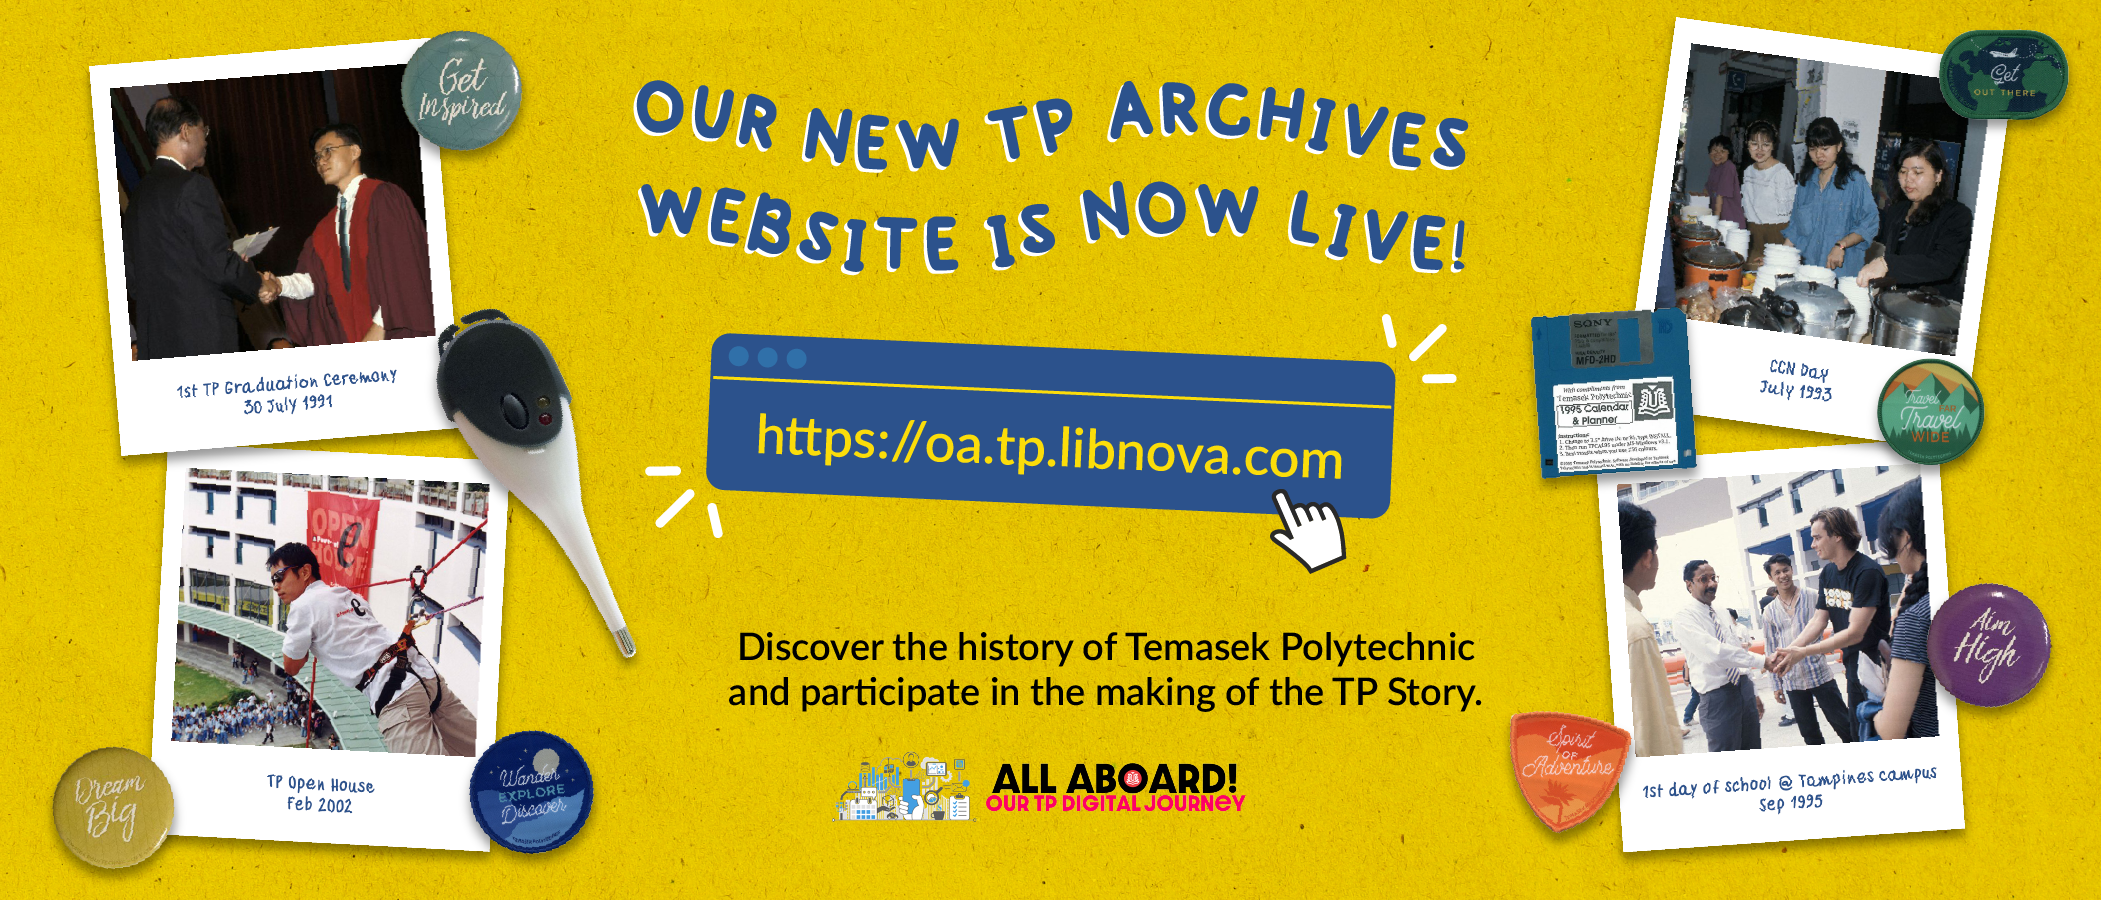 Our new TP Archives website is live!